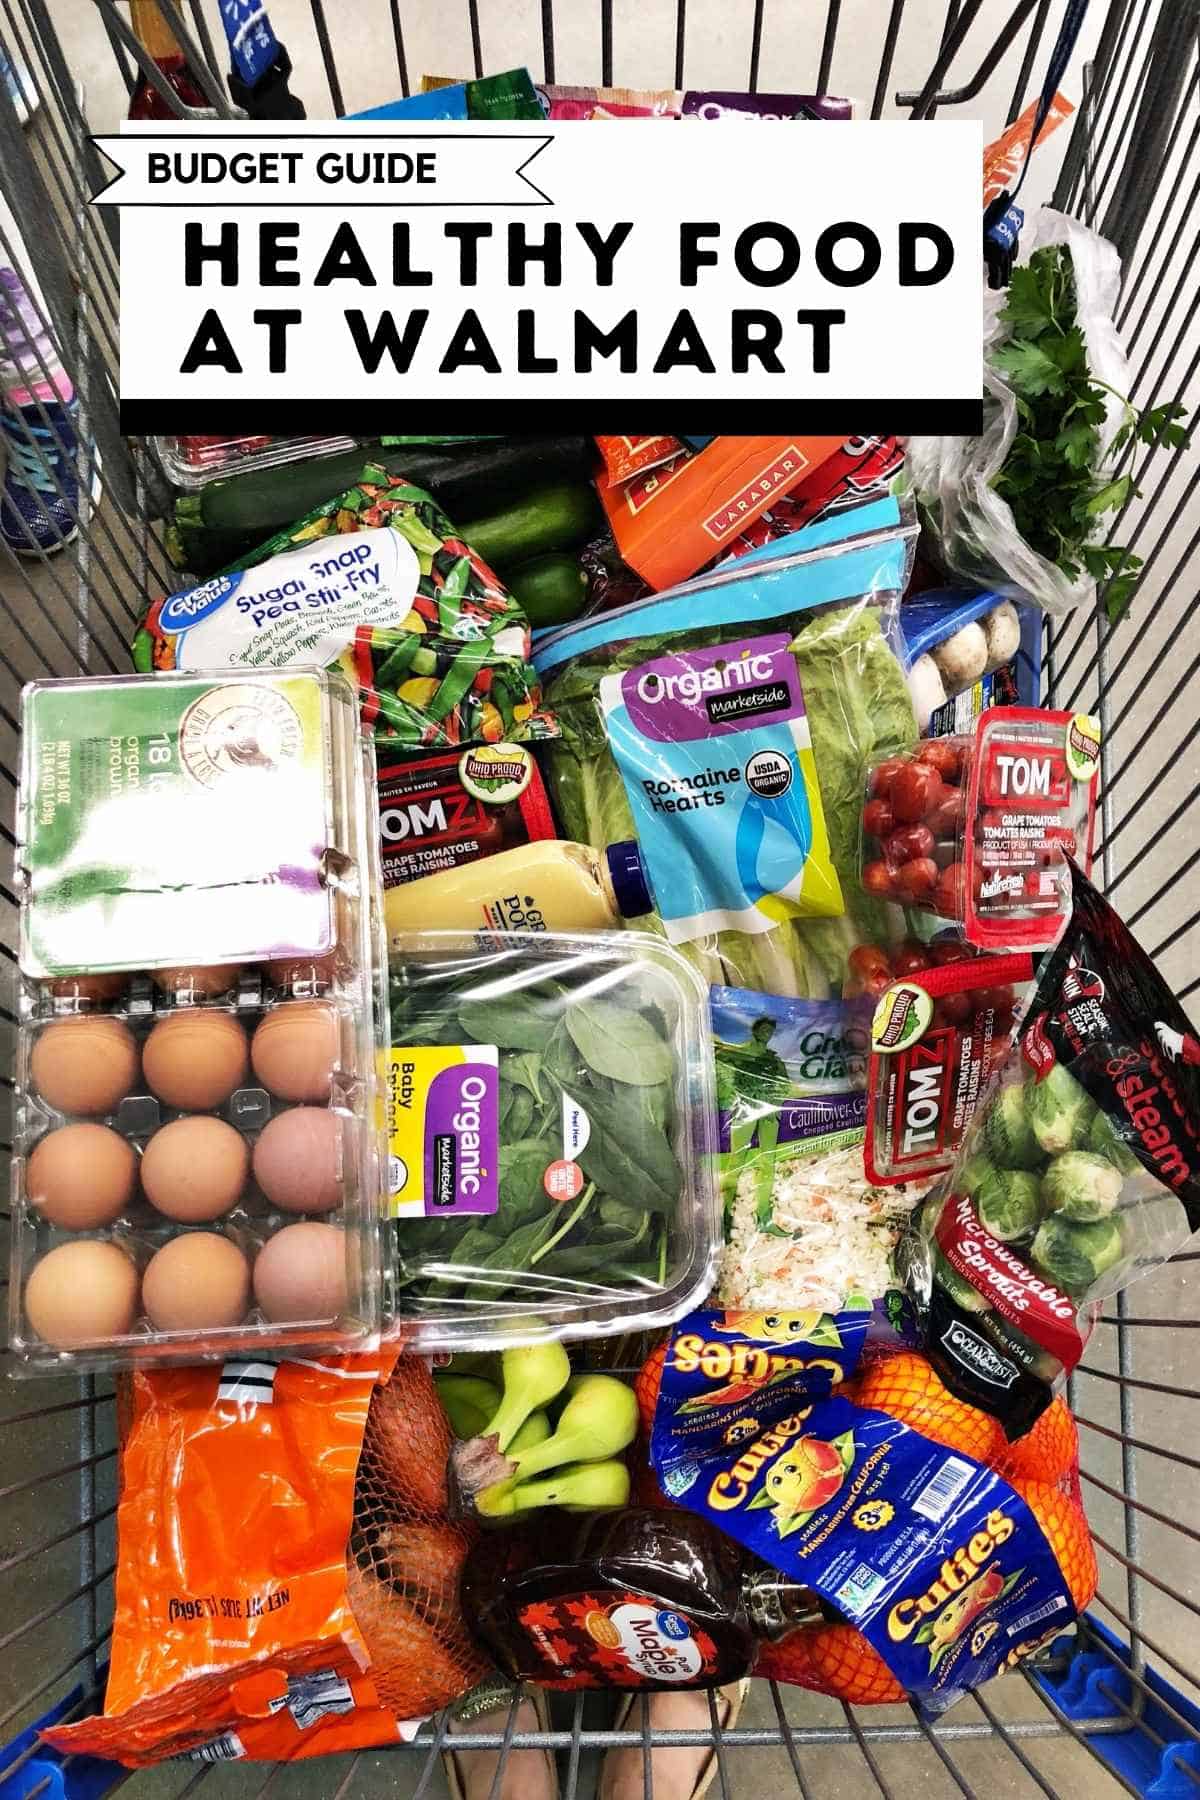 image of walmart shopping cart with healthy food in it.